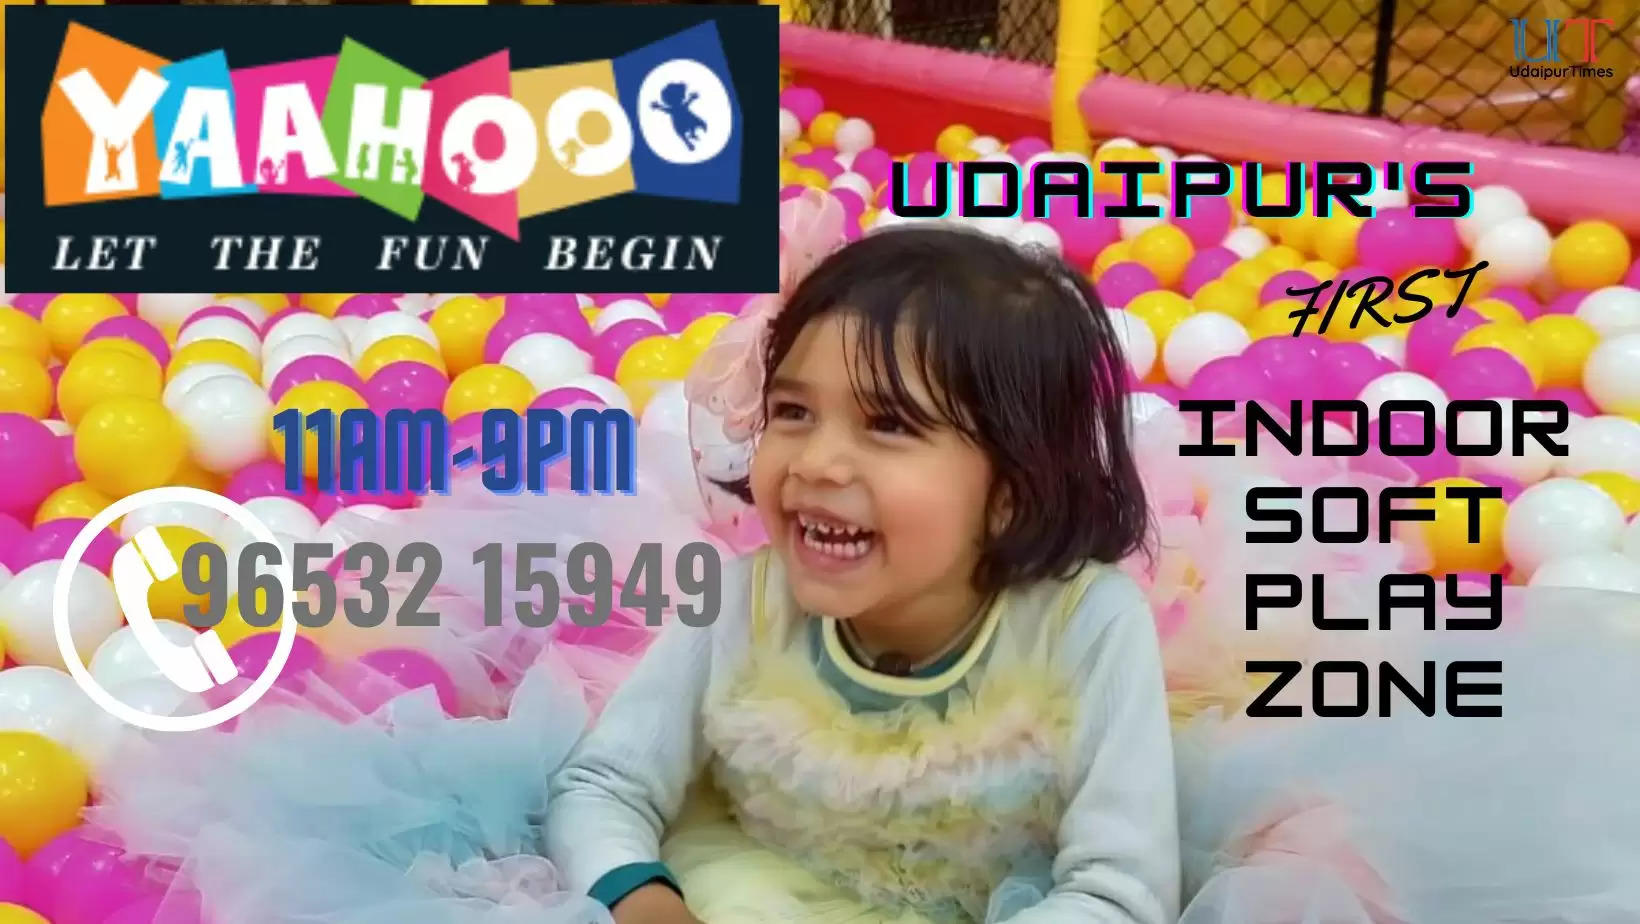 yaahooo is Udaipur's First Soft Play Area for Children aged 1 till 15 years of age, Special Attention to Children in Kids Play Area